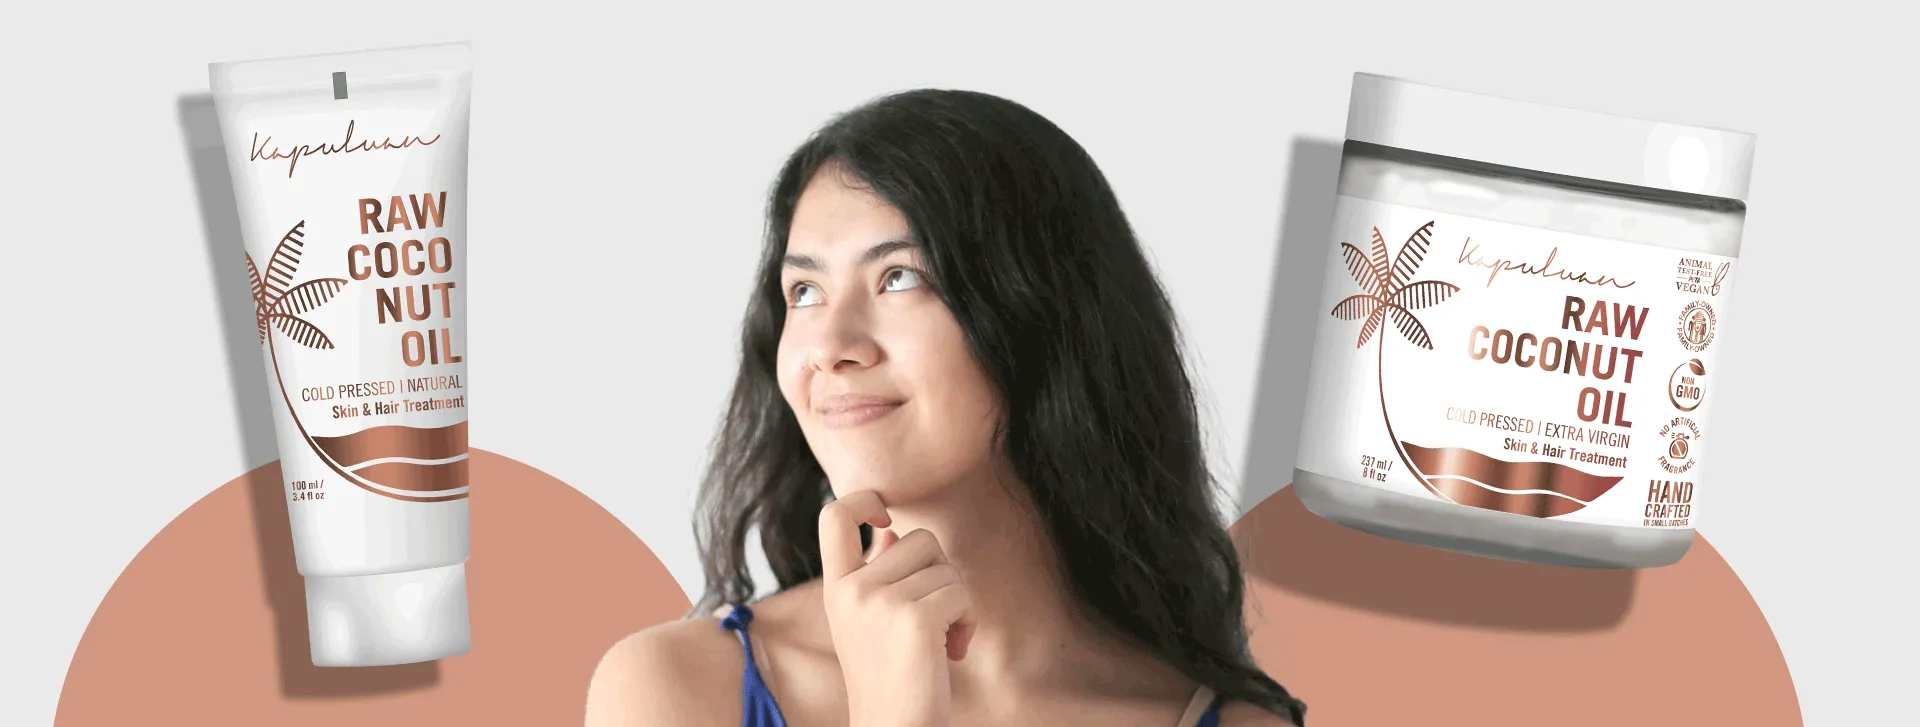 A young woman with long dark hair looks up thoughtfully. She is sandwiched between two products: a jar of raw coconut oil on the right and a tube of raw coconut oil lotion on the left, both labeled "Kopari Beauty." The background is a mix of beige and white.